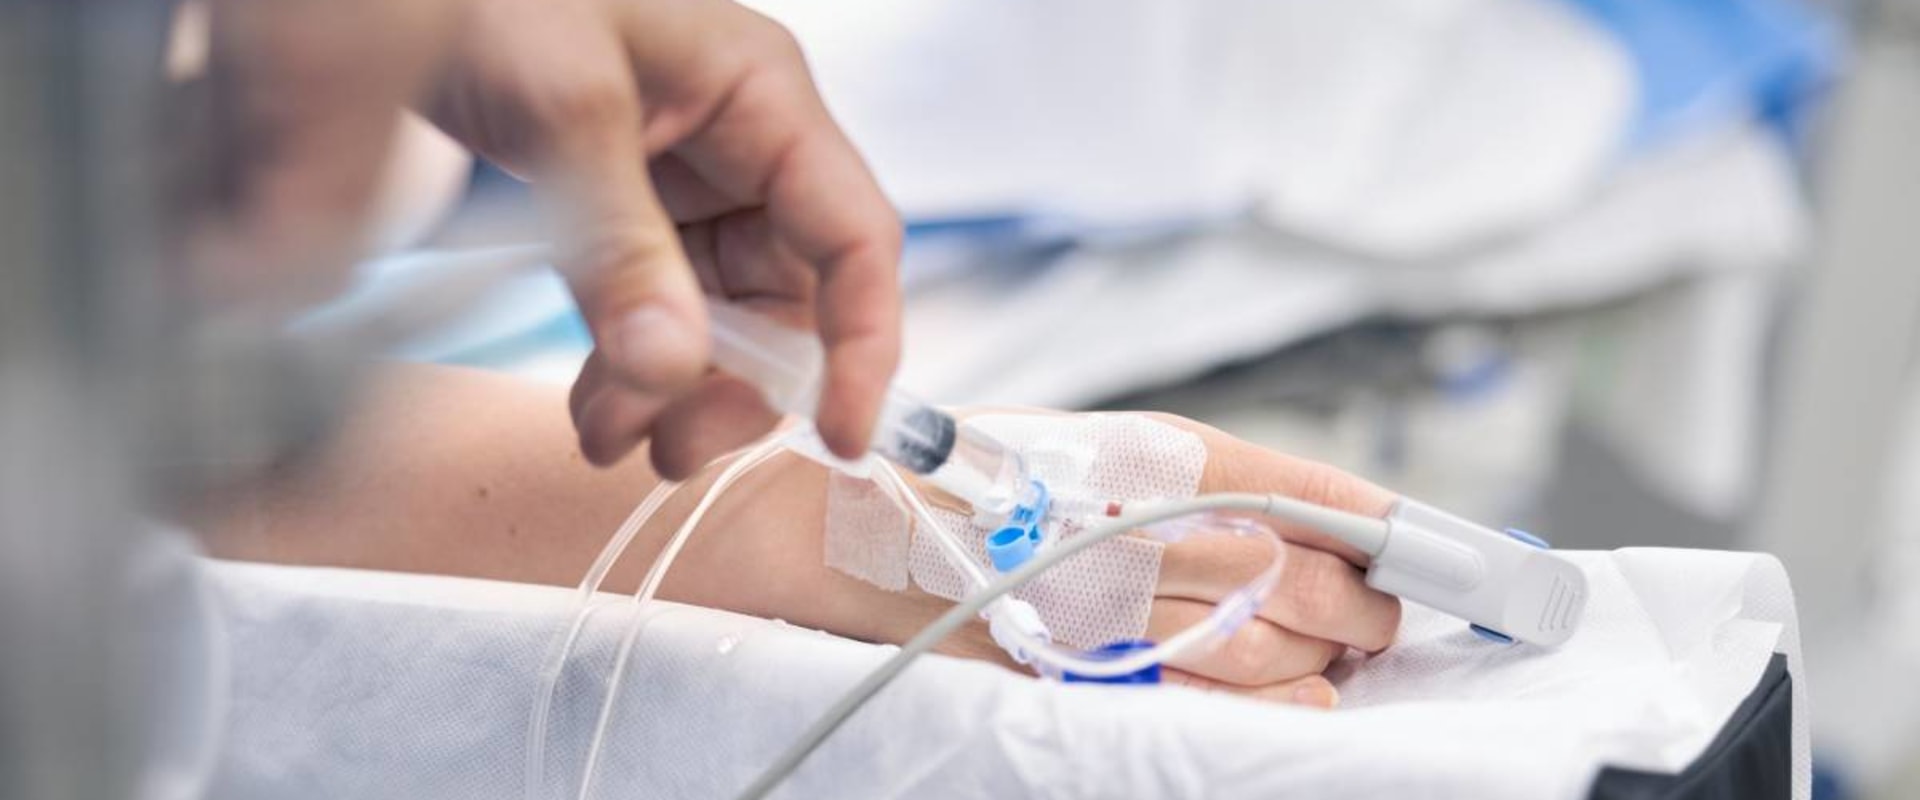 Understanding IV Sedation: Medication Delivery through an IV Line in the Arm or Hand